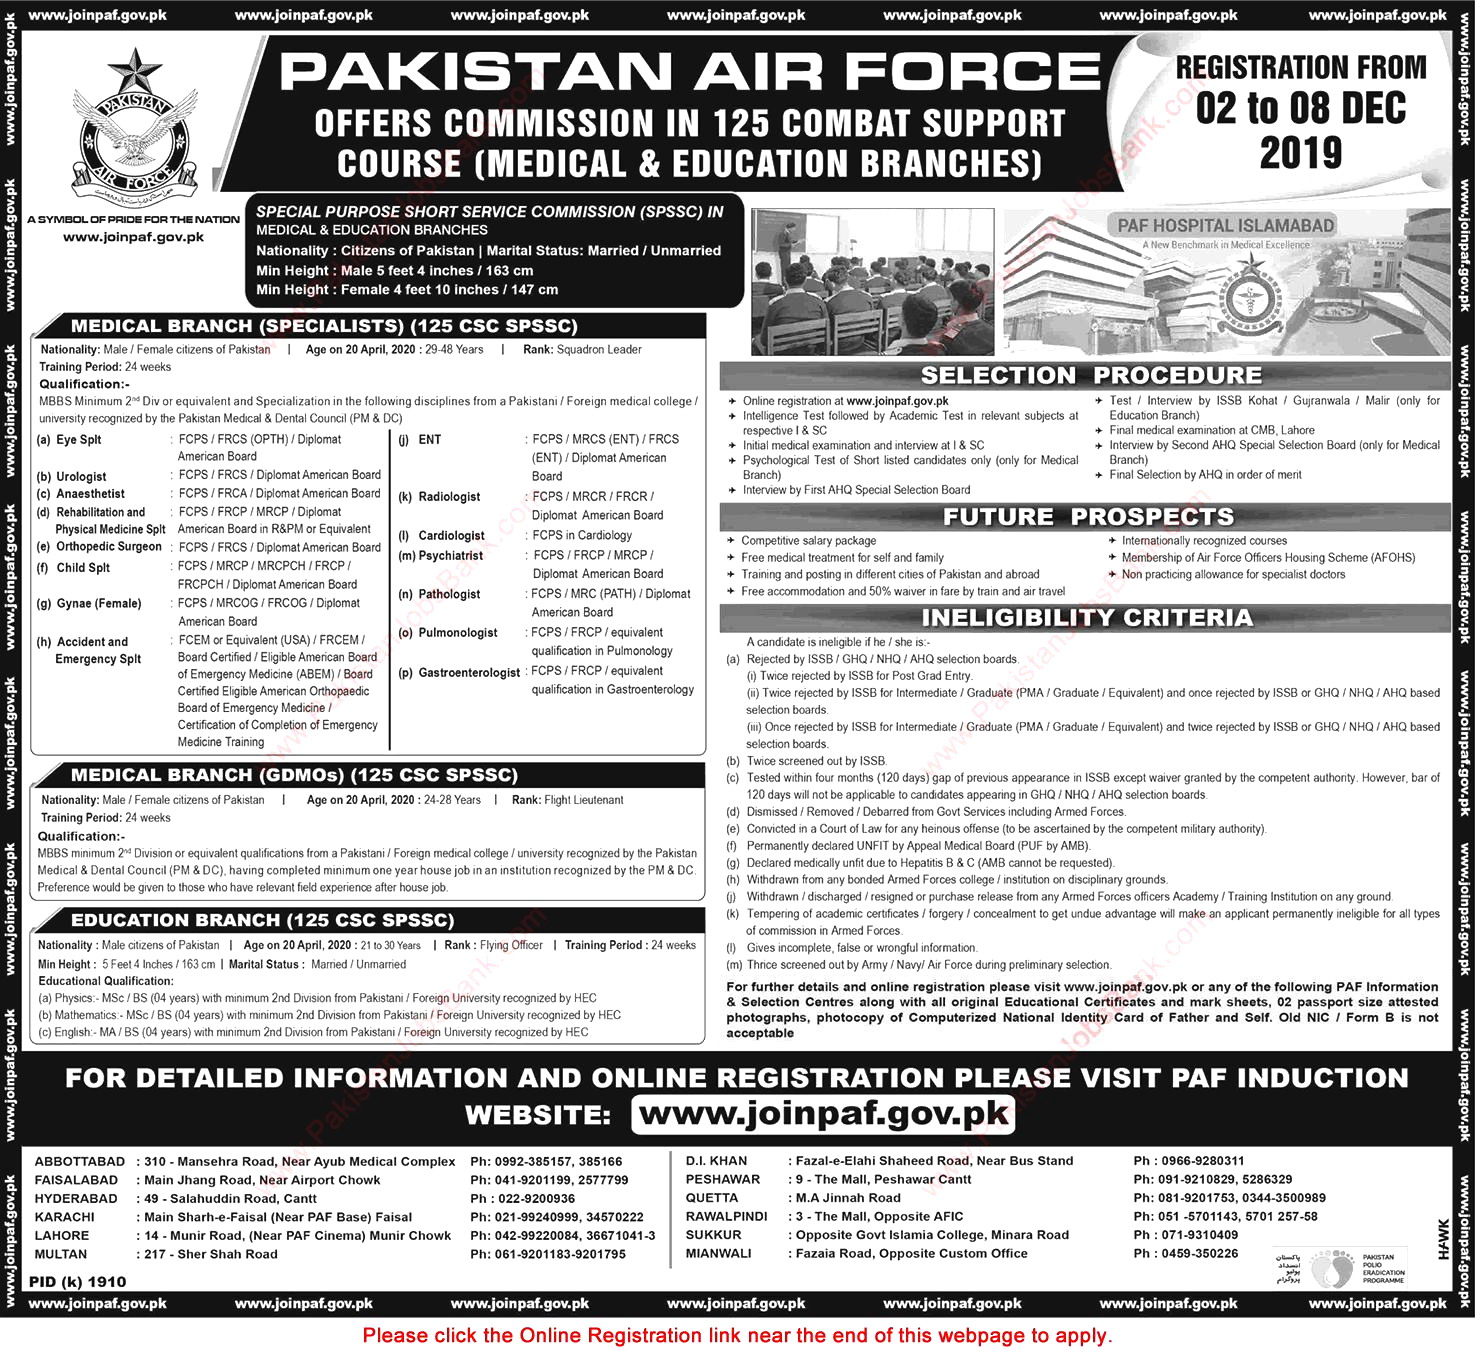 Join Pakistan Air Force